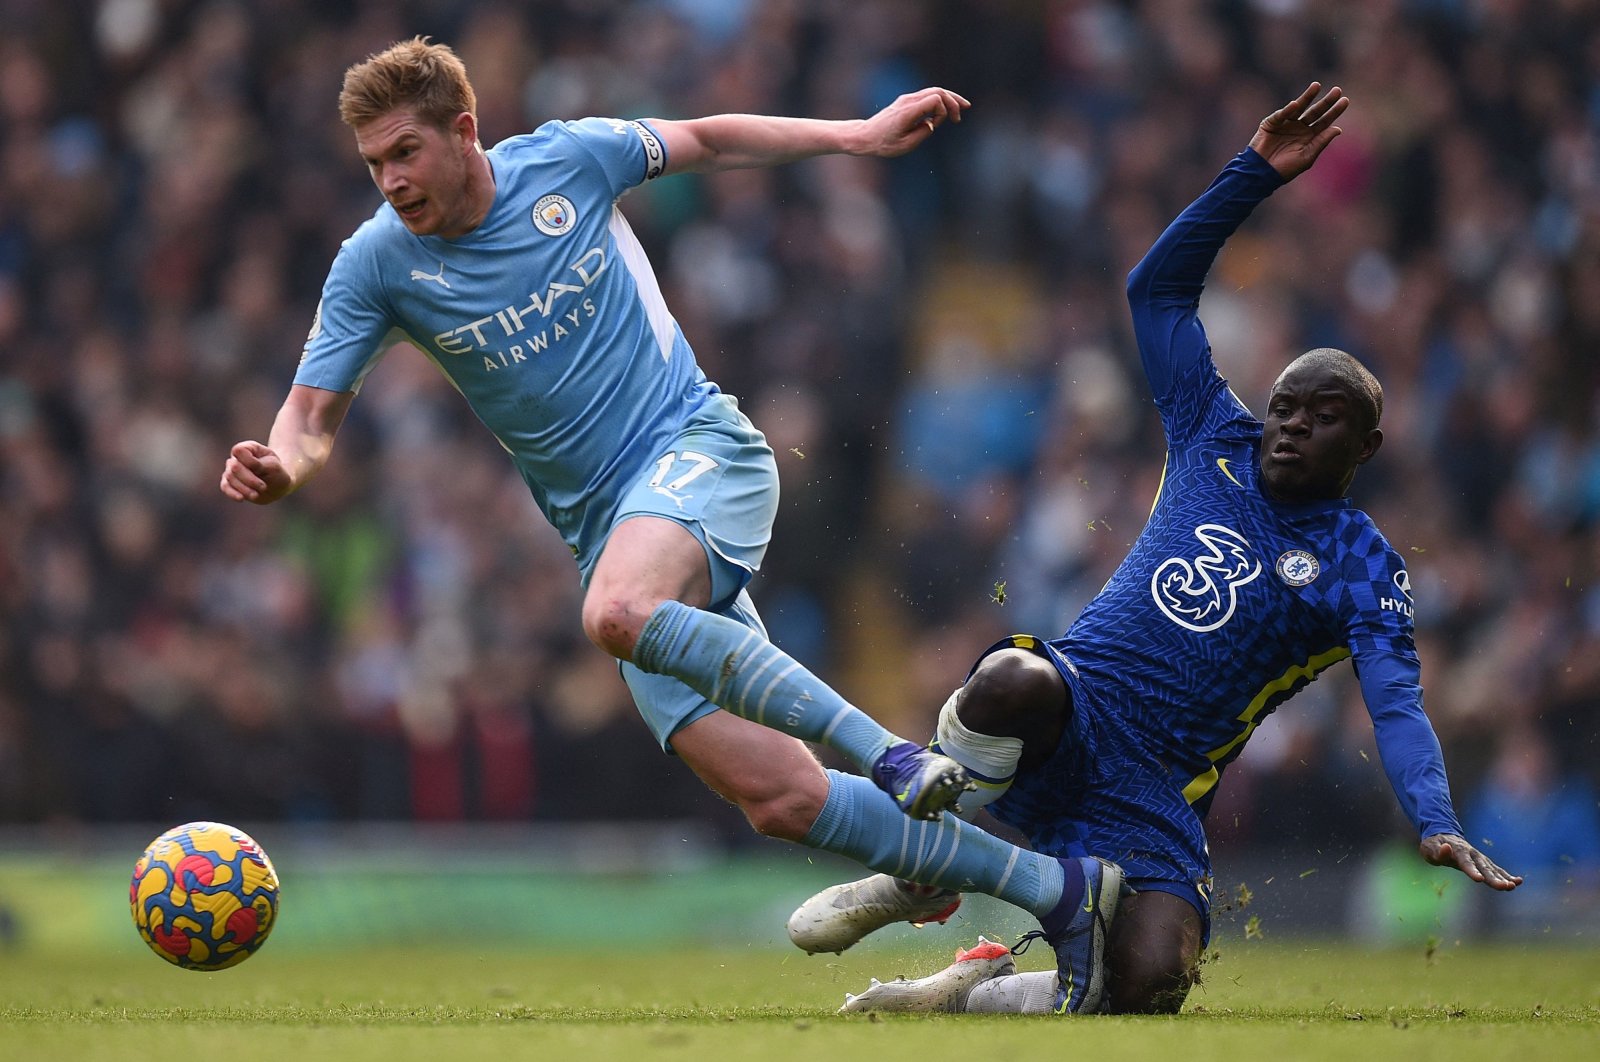 Manchester City&#039;s Kevin De Bruyne (L) avoids a challenge by Chelsea&#039;s N&#039;Golo Kante during the Premier League match in Manchester, England, Jan. 15, 2022. (AFP Photo)